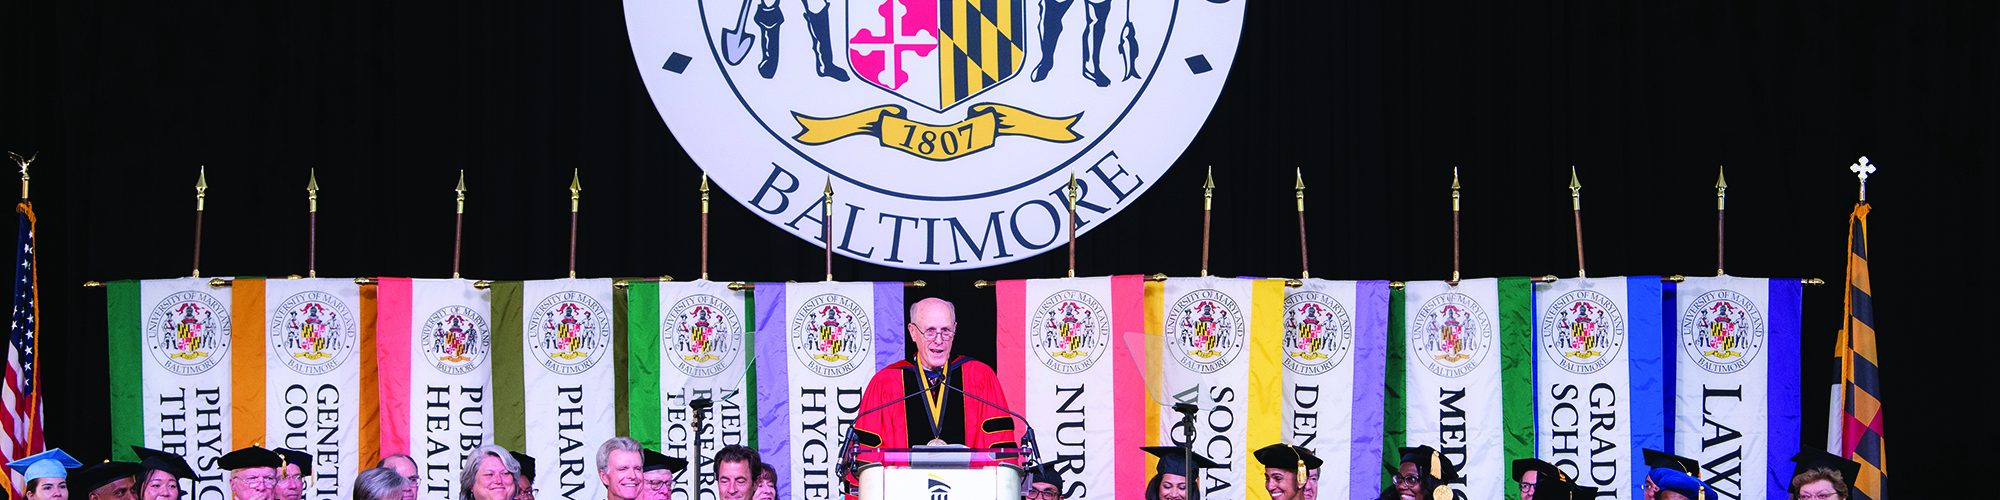 In September 2022, UMB hosted its first Faculty Convocation, an opportunity to recognize and celebrate the University’s outstanding faculty.